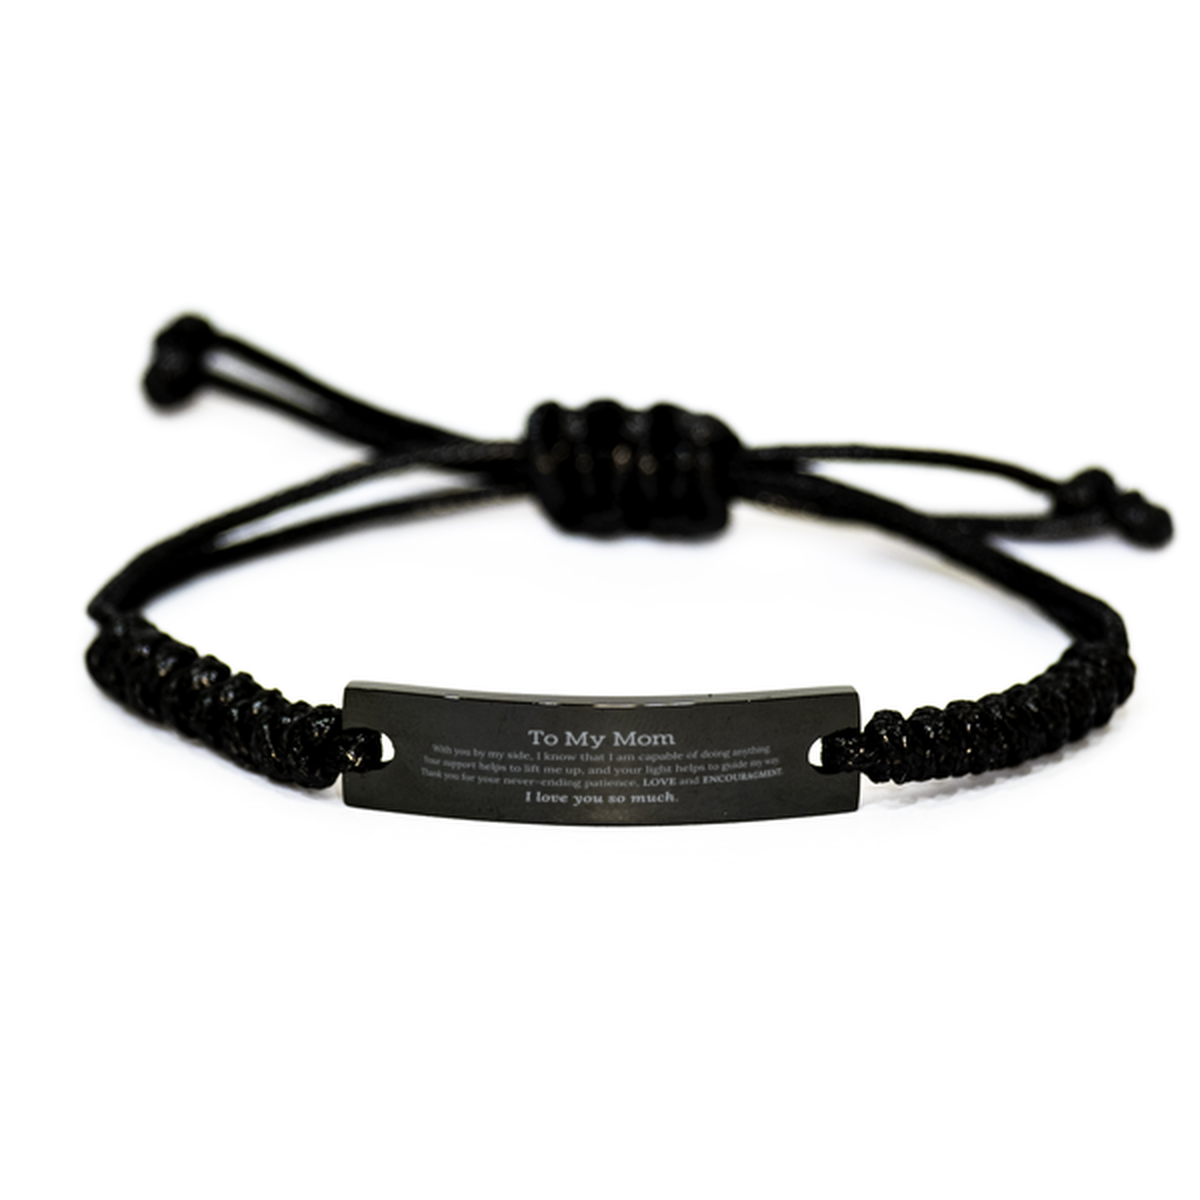 Appreciation Mom Black Rope Bracelet Gifts, To My Mom Birthday Christmas Wedding Keepsake Gifts for Mom With you by my side, I know that I am capable of doing anything. I love you so much